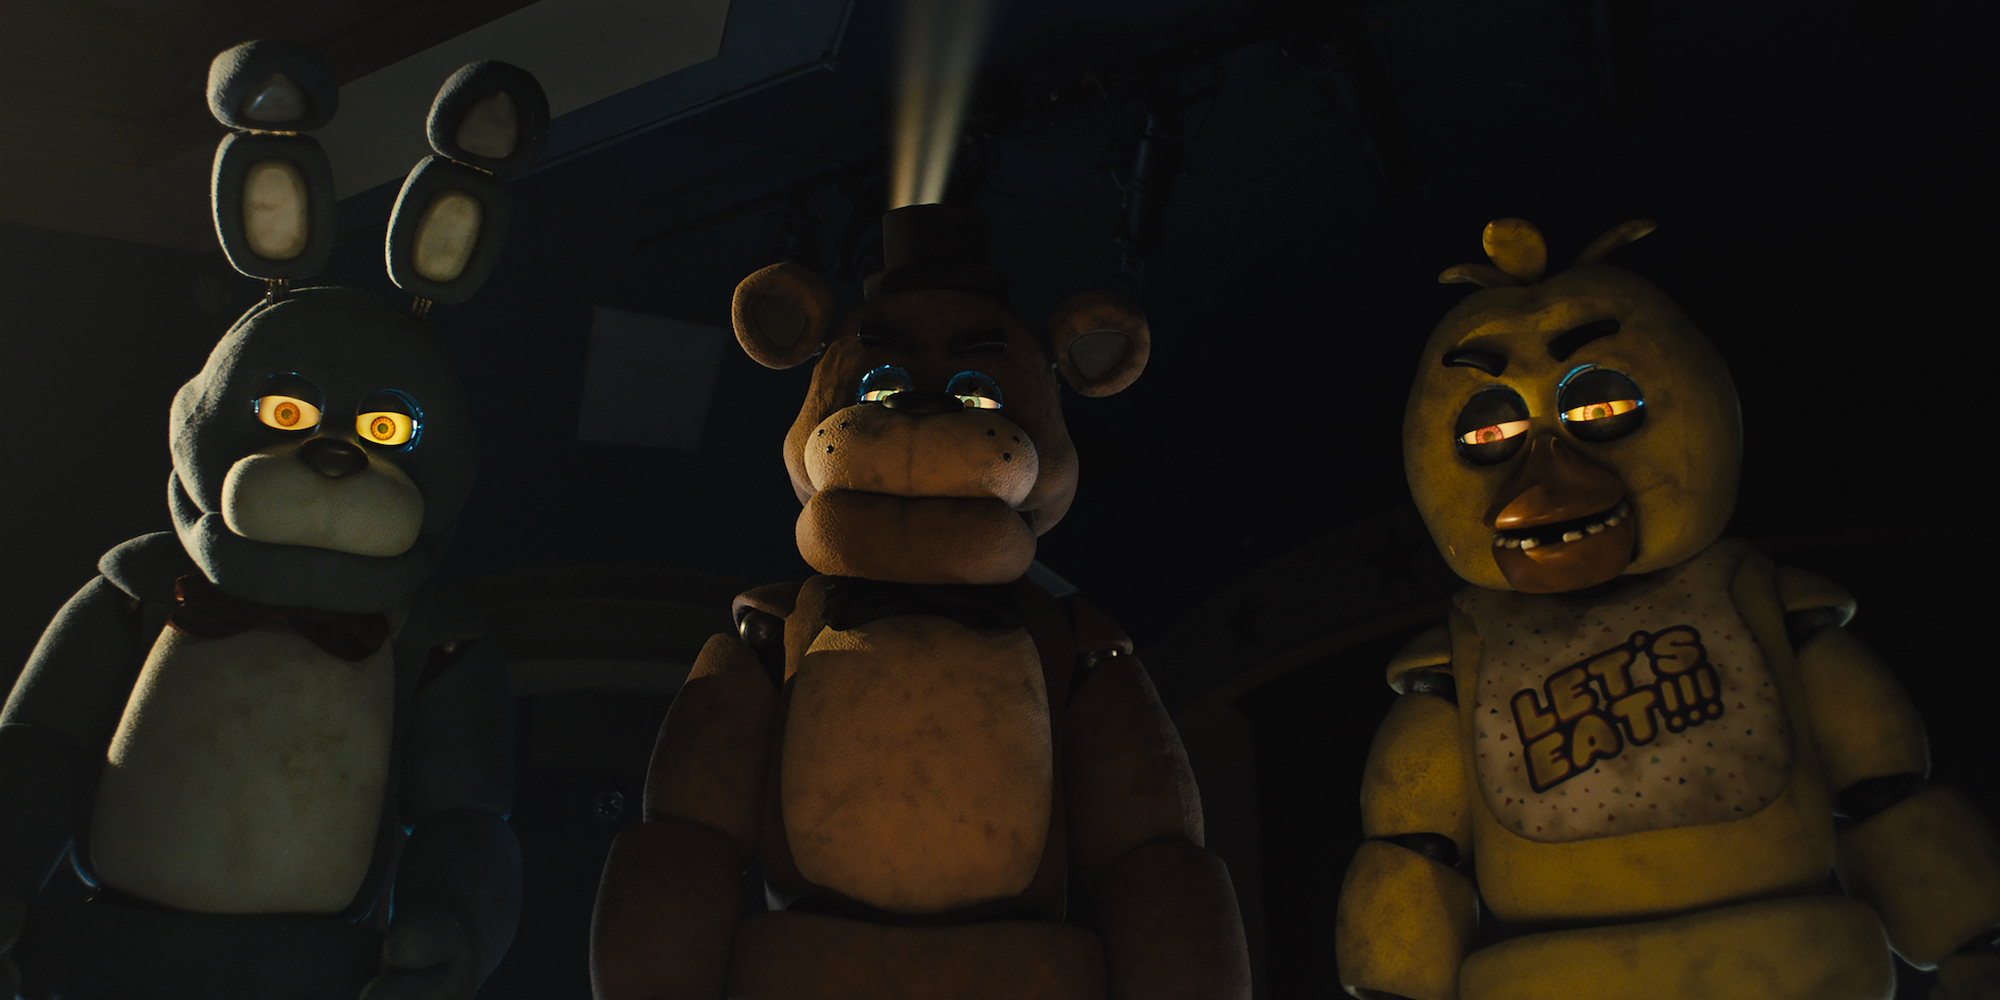 Five Nights at Freddy's Review: The Iconic Game Becomes a Tedious